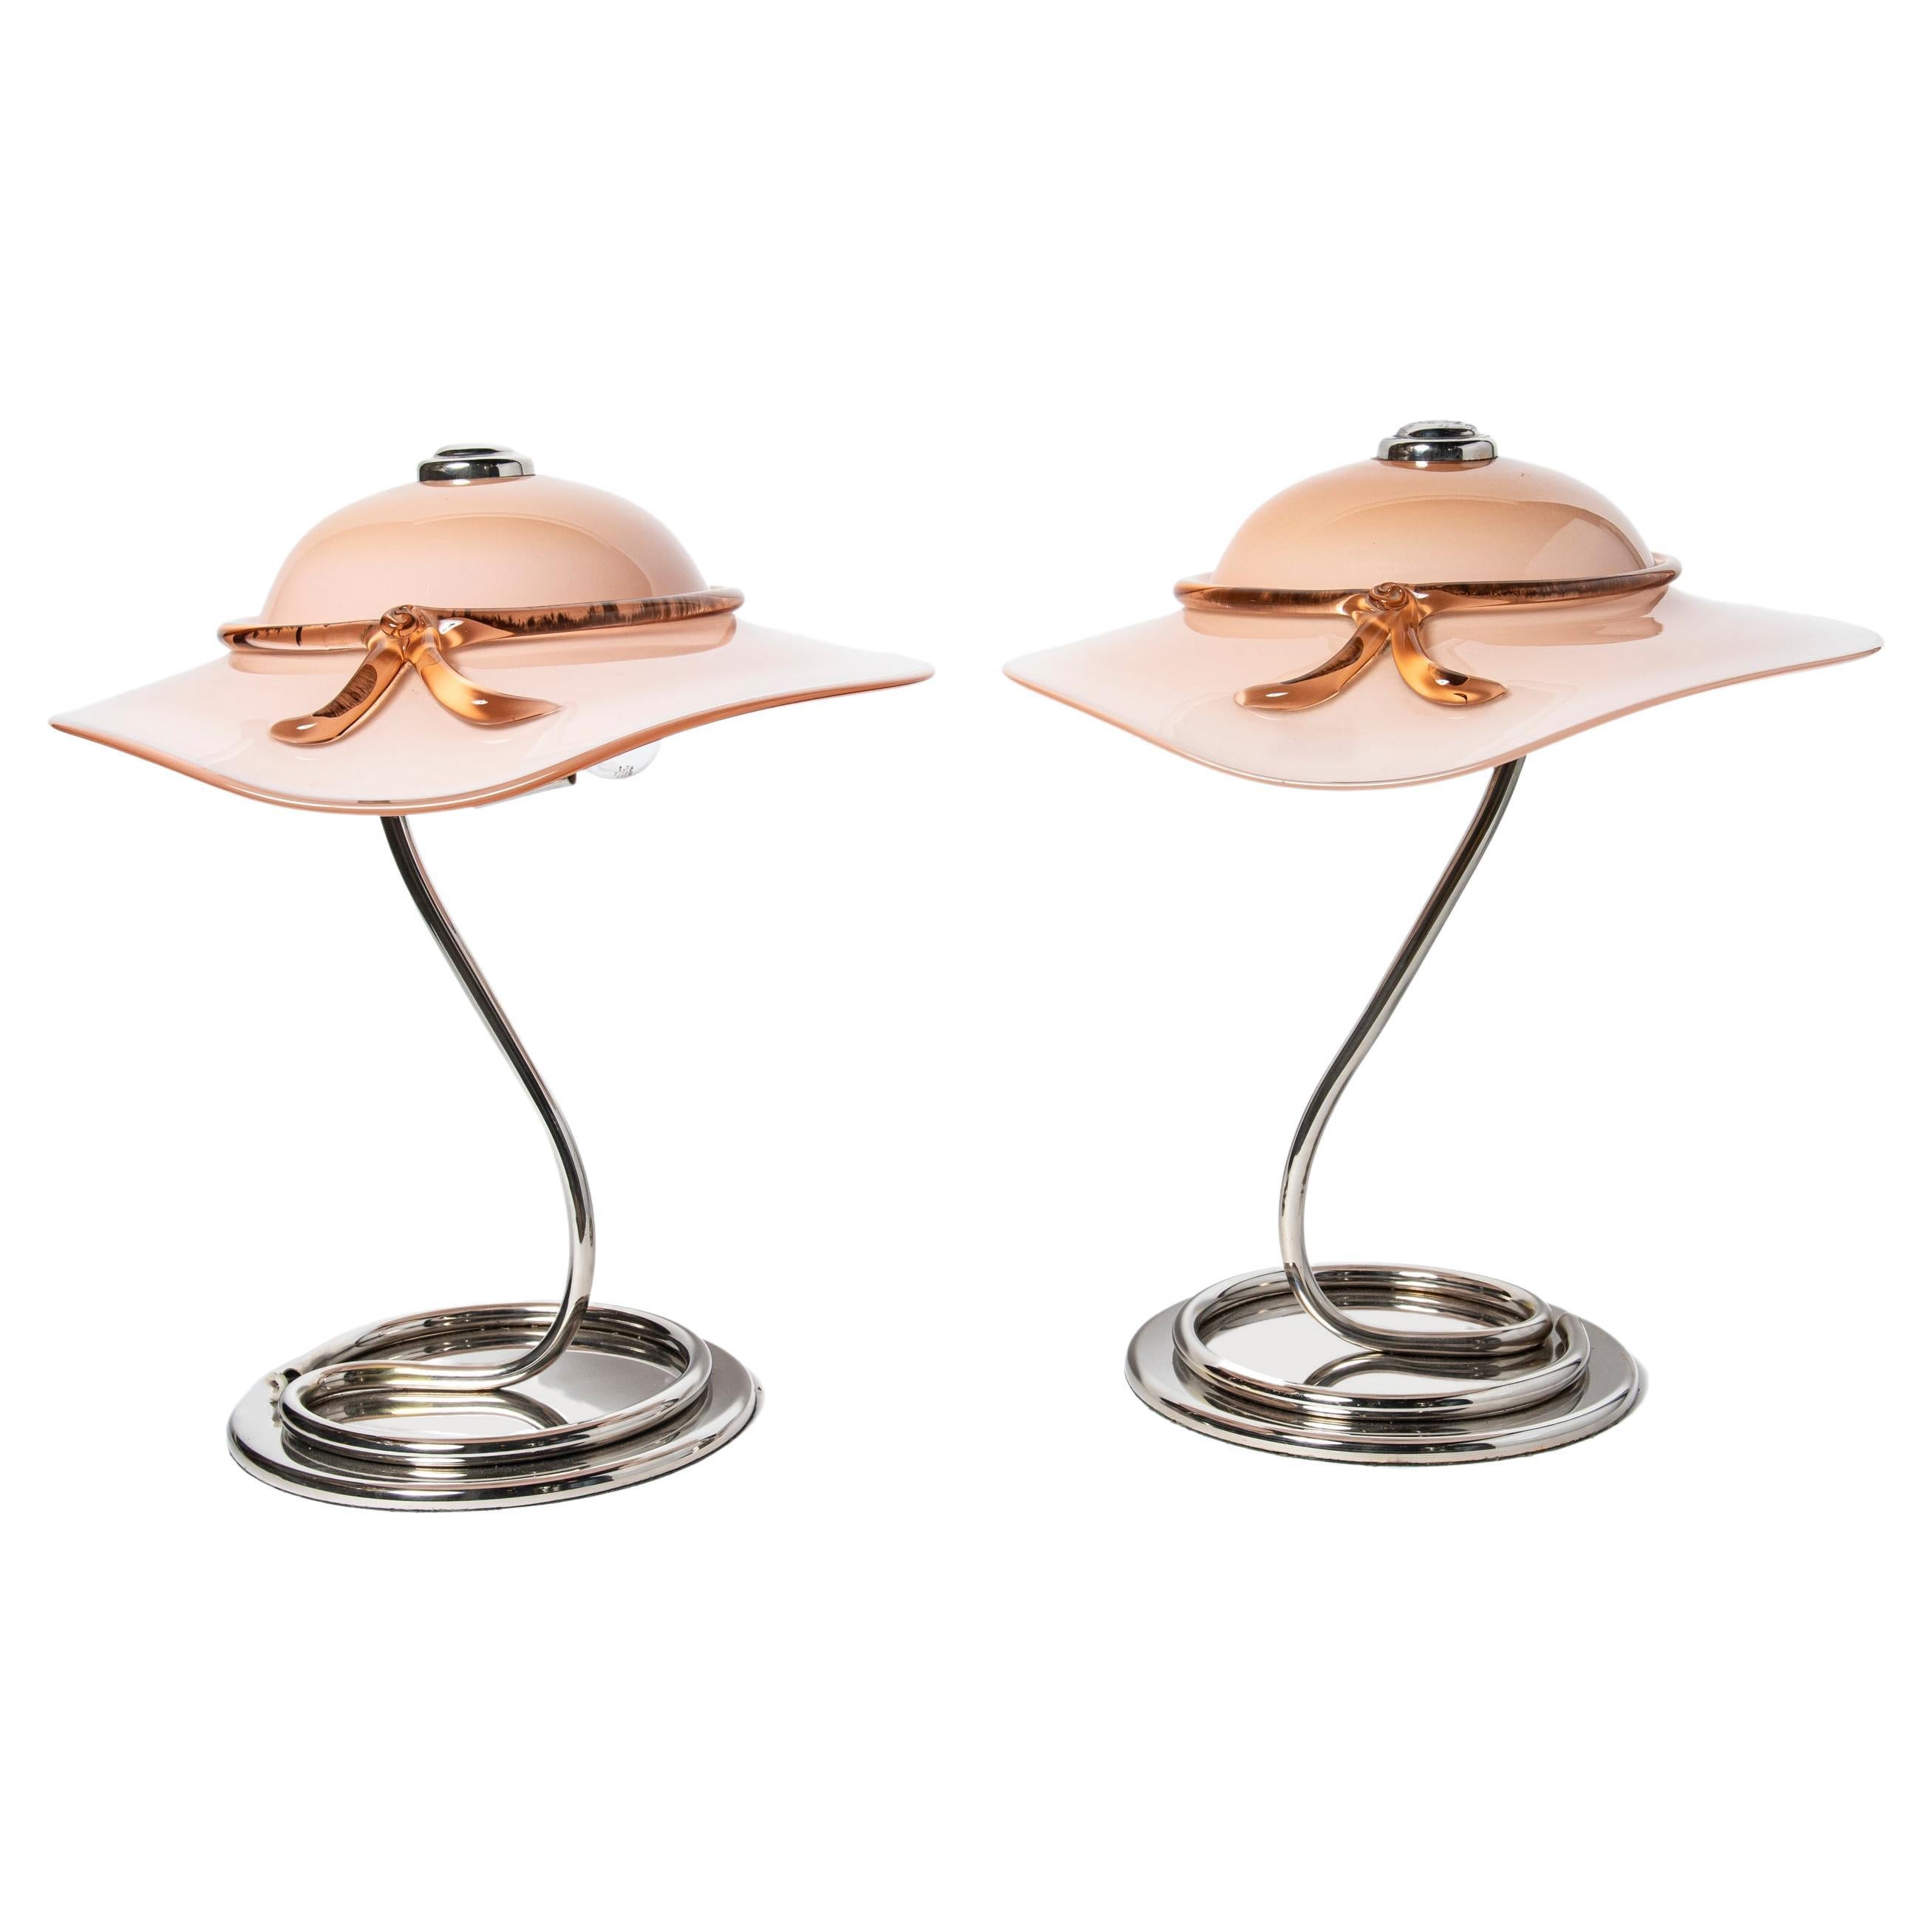 Murano glass and chrome capeline table lamps. Italy, circa 1970.